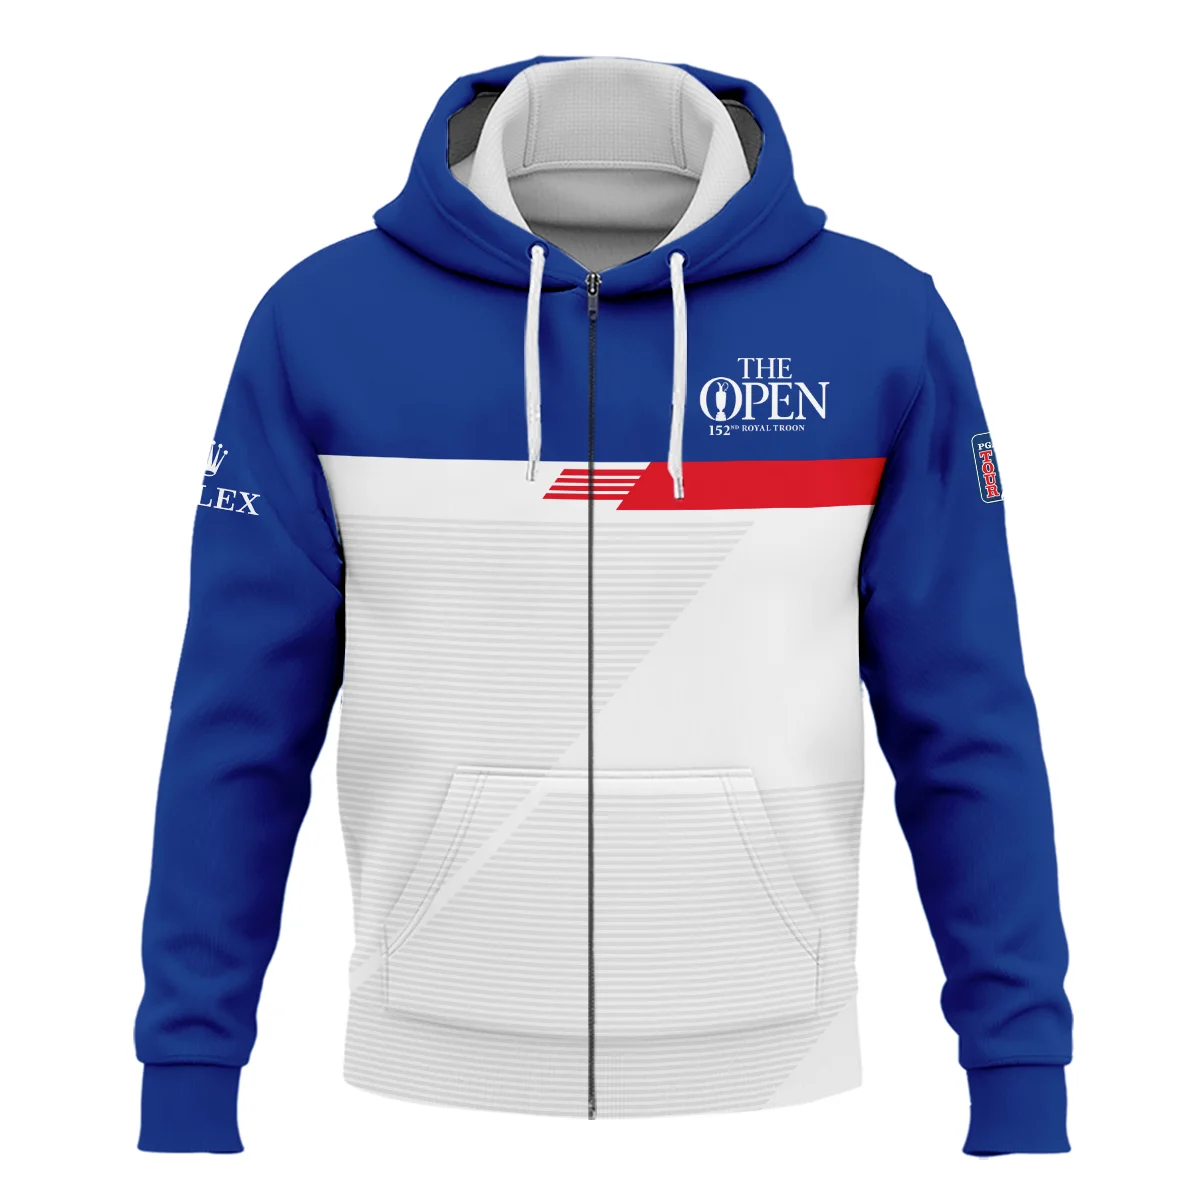 152nd Open Championship Golf Blue Red White Line Pattern Background Rolex Zipper Hoodie Shirt All Over Prints HOTOP260624A01ROXZHD